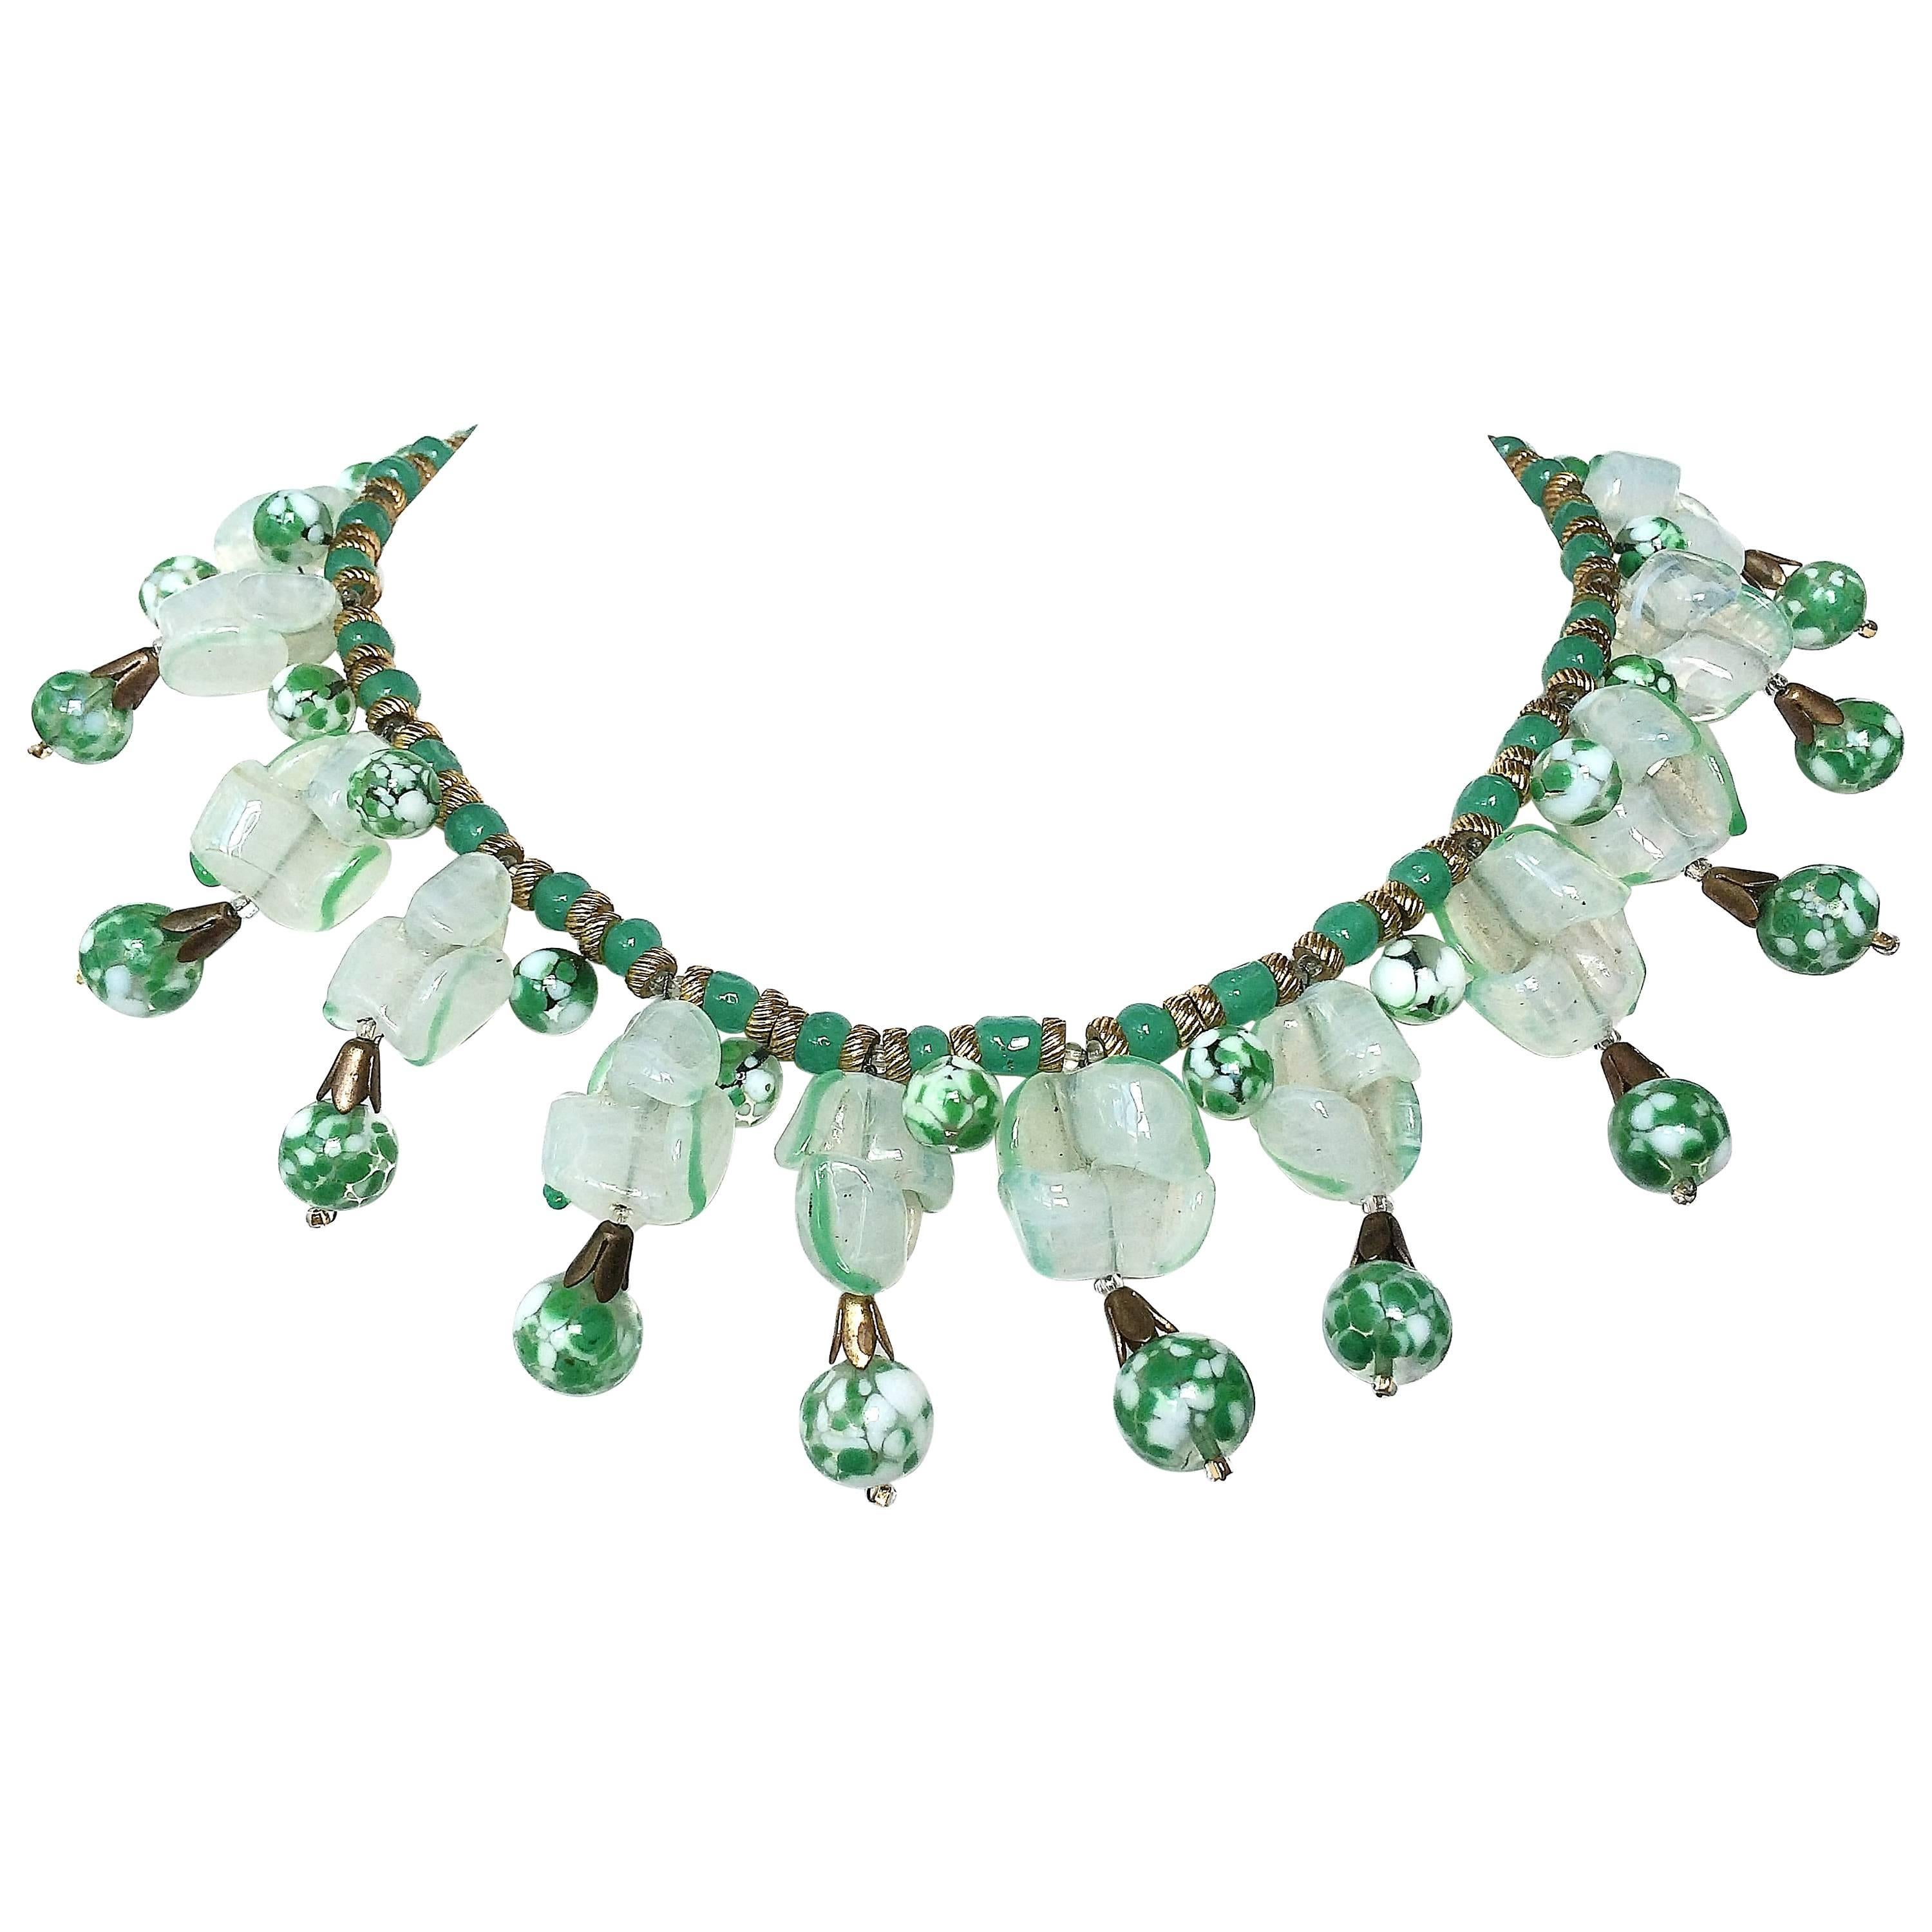 Rousselet glass and gilt fringed collar, 1950s